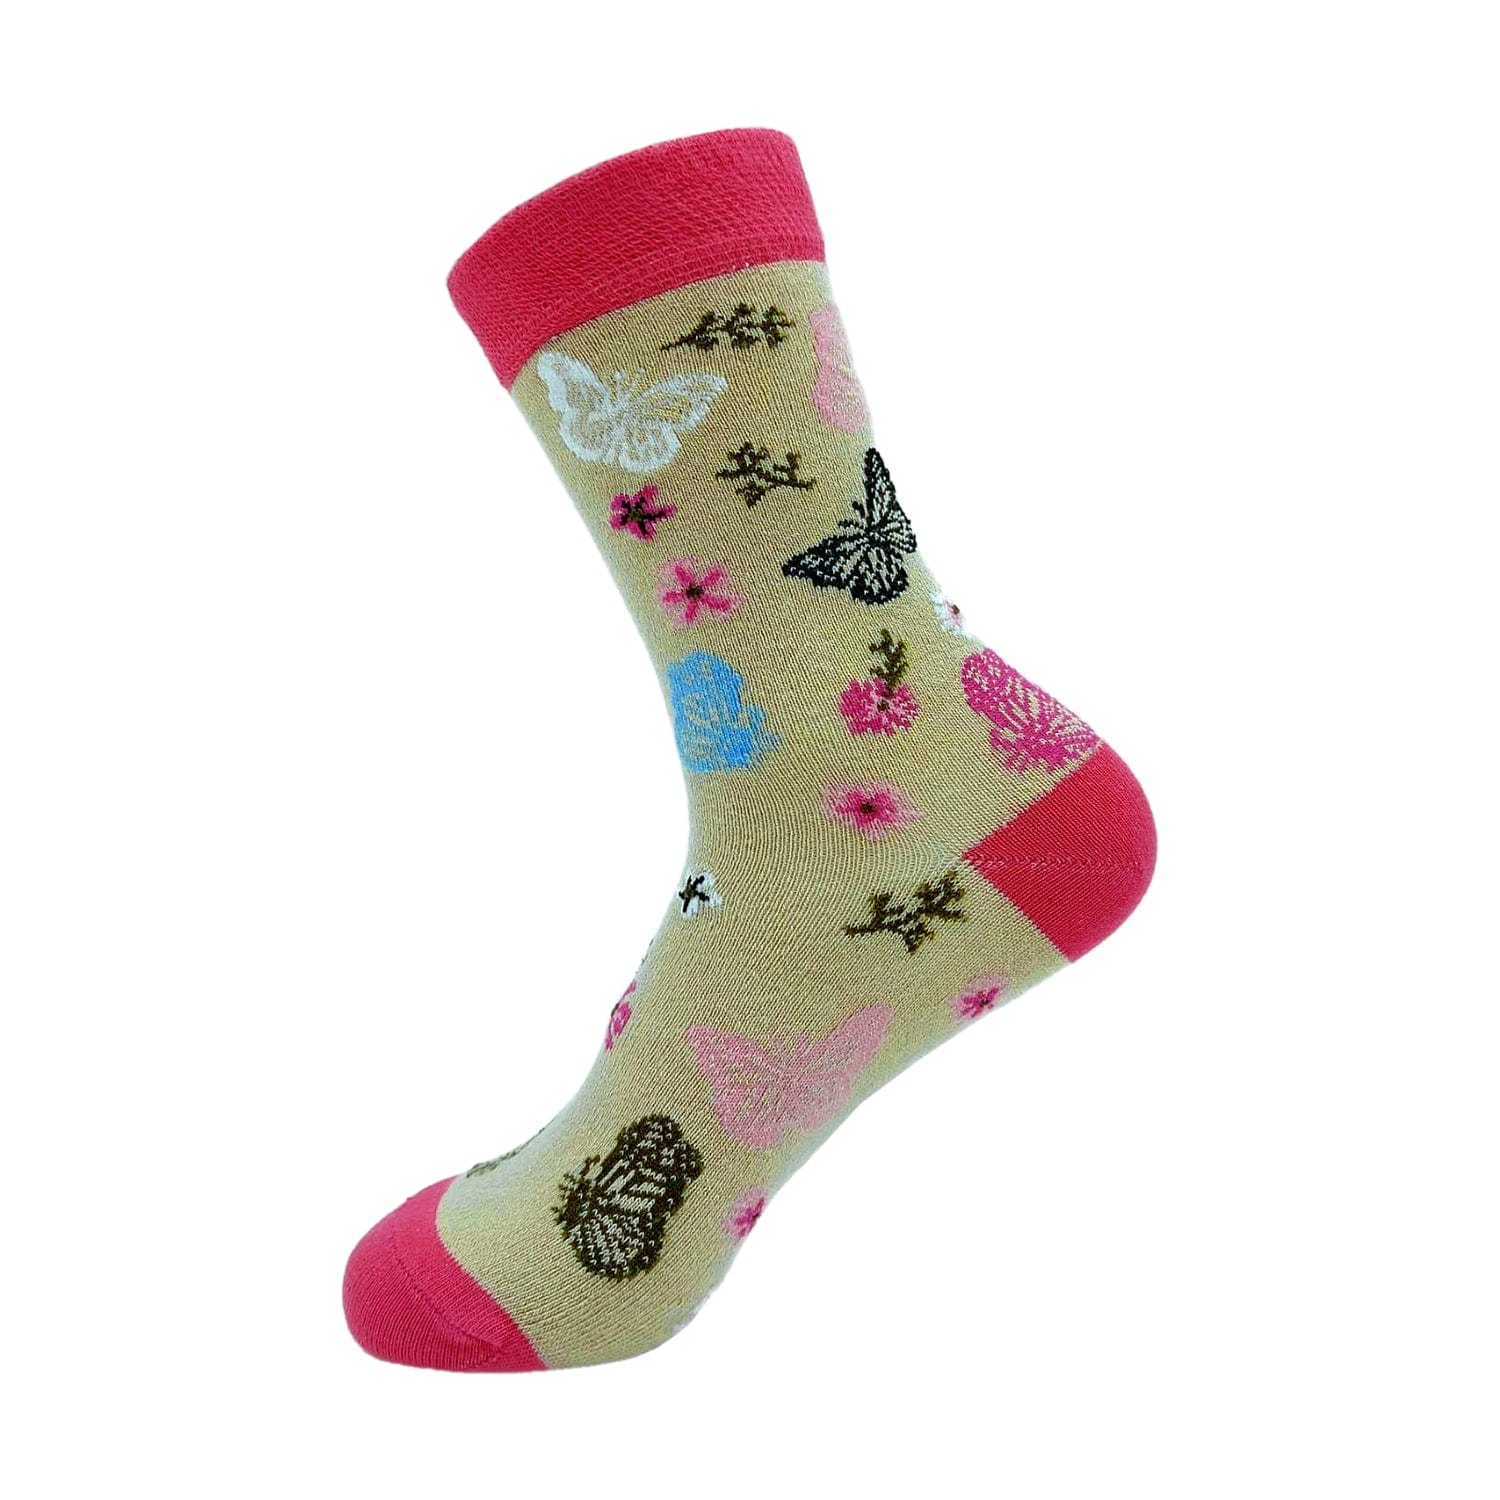 Floral Socks Ladies Green Pink Bamboo Cotton Blend Lime Flowers